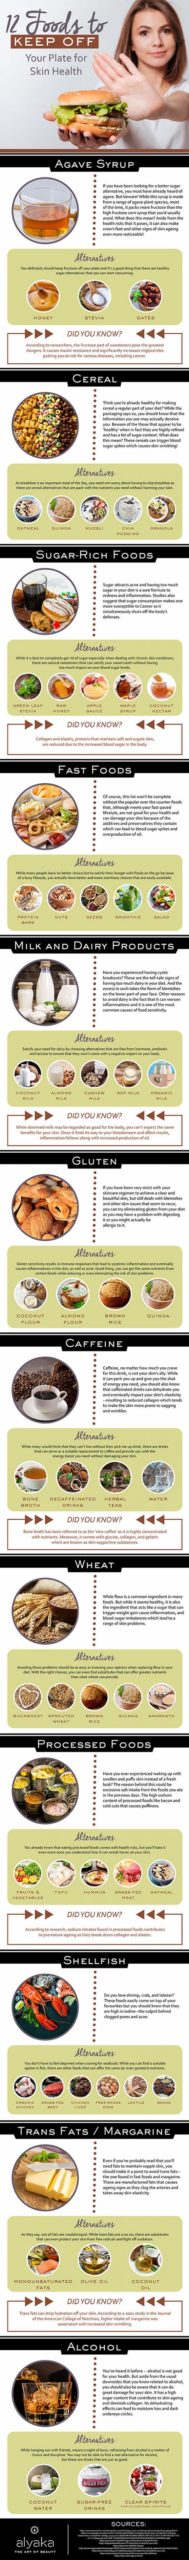 12-Foods-that-Your-Skin-Hates